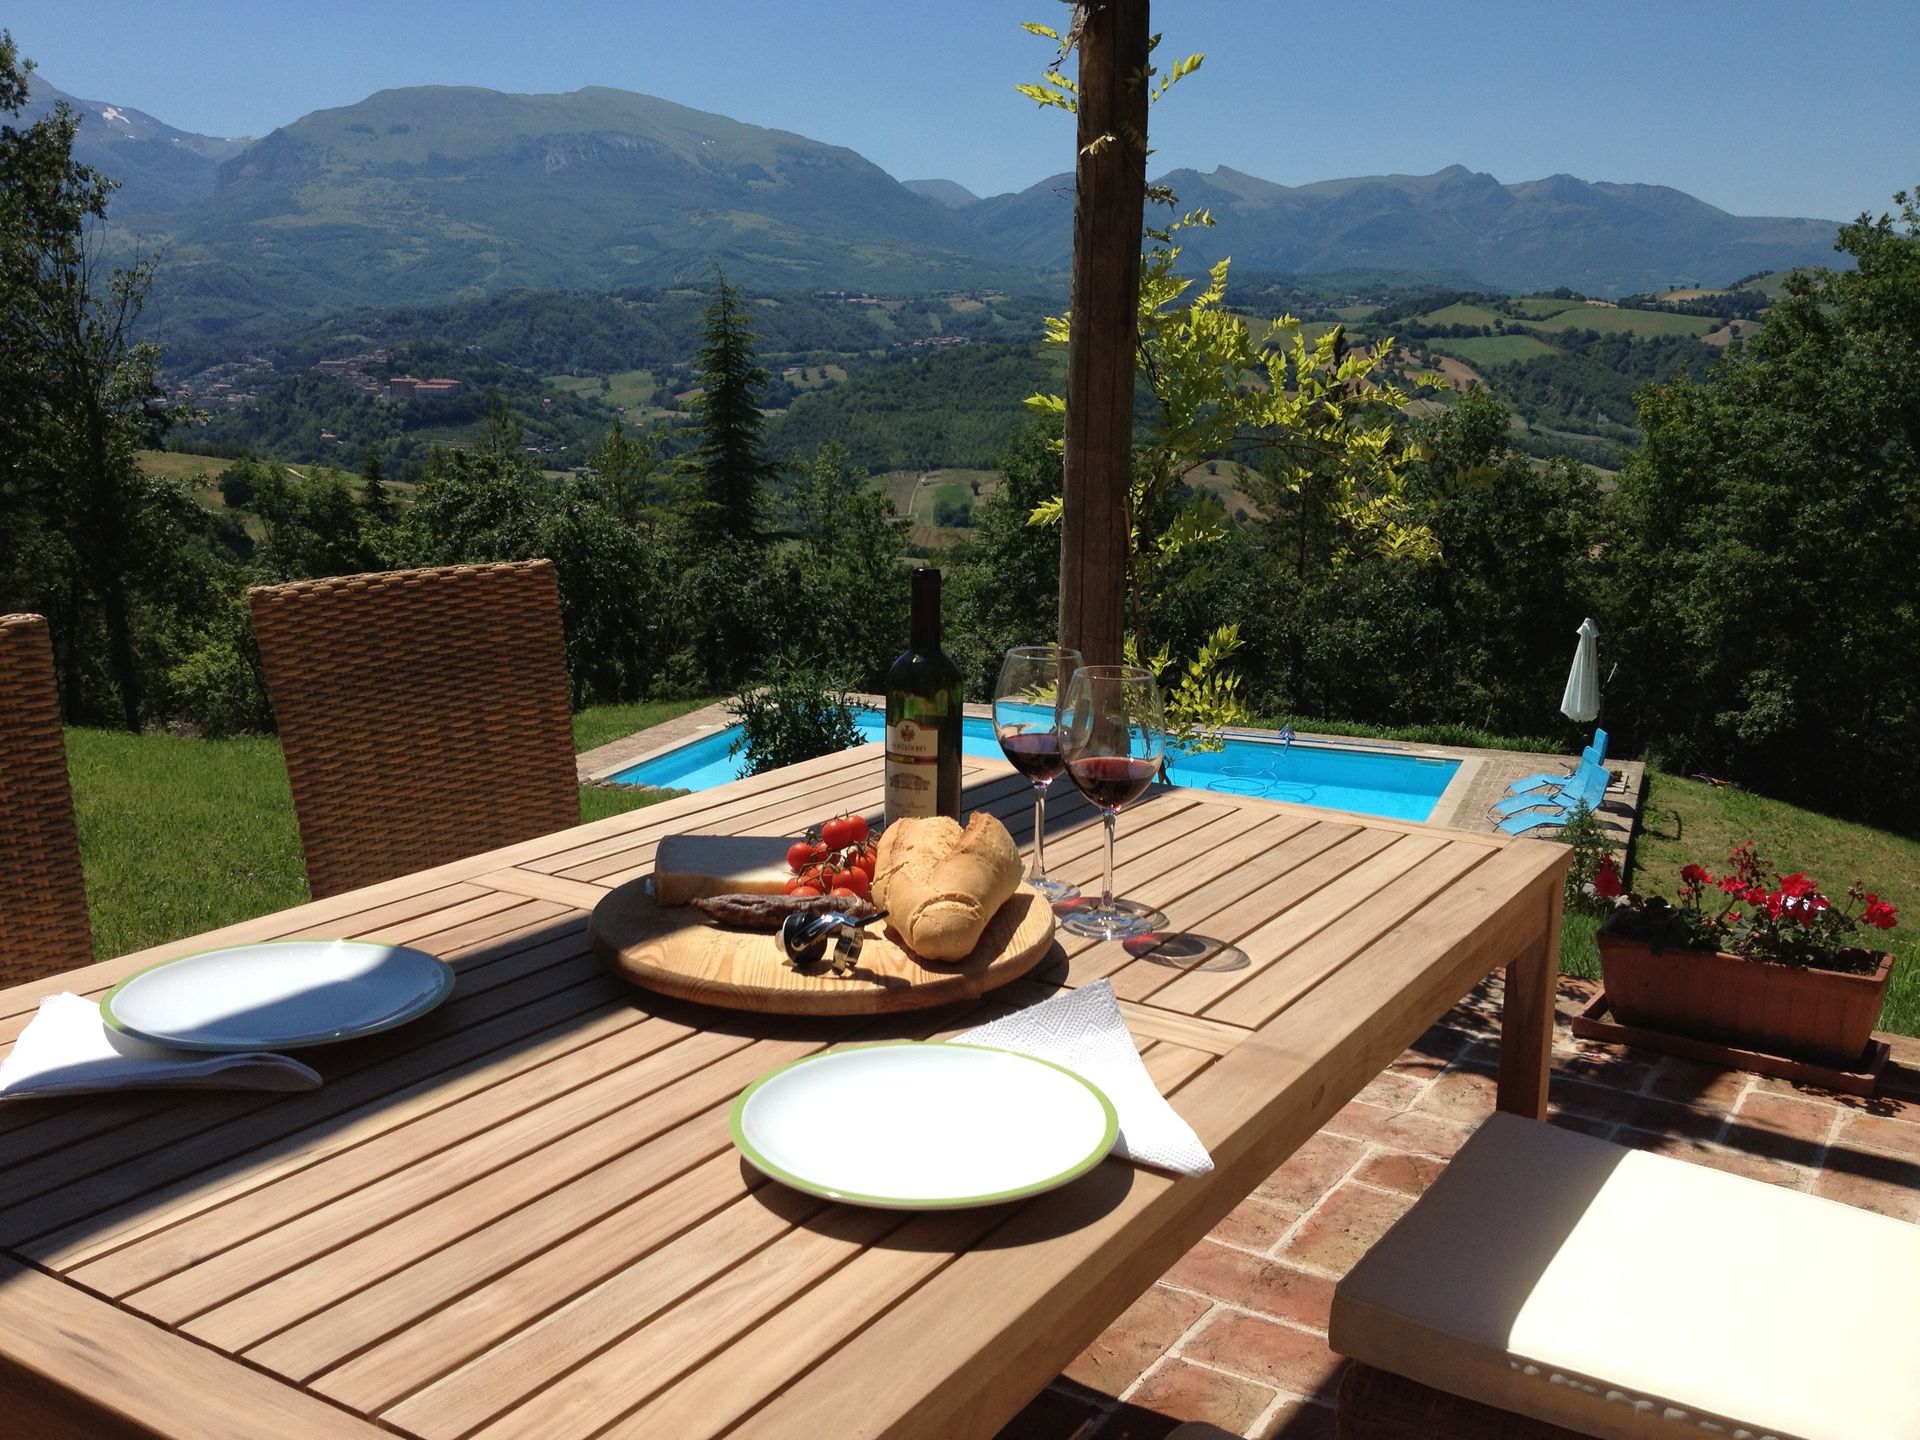 Le Marche farmhouse holiday rental with pool